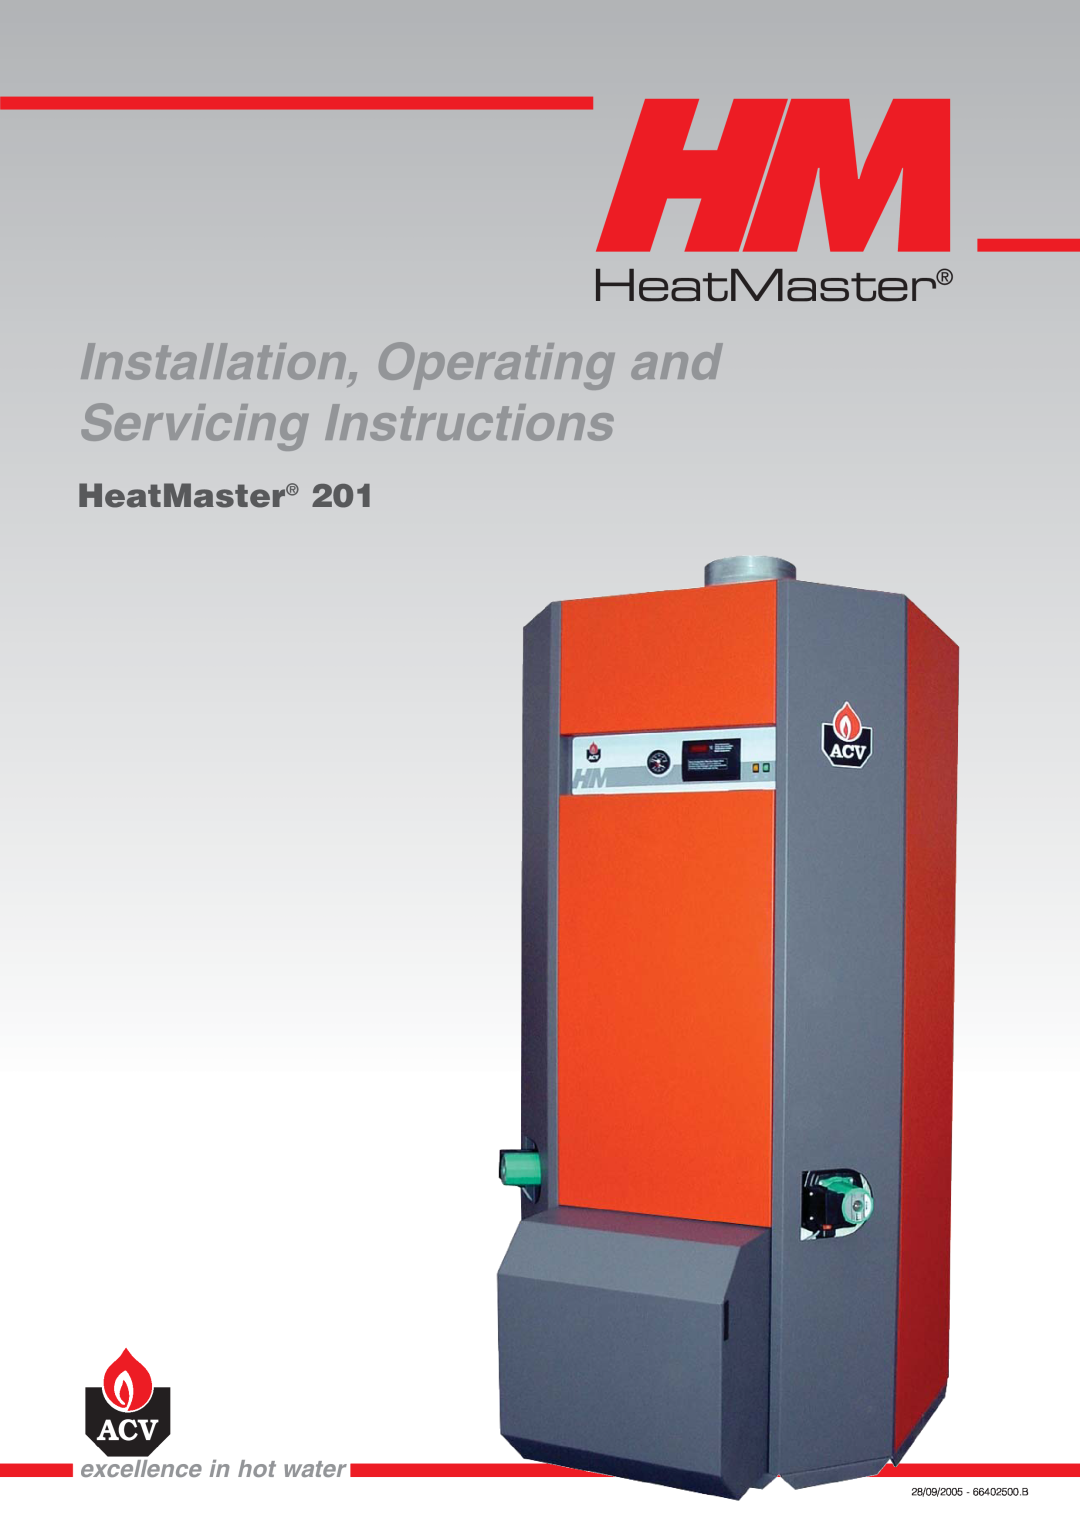 Heatmaster 201 manual Installation, Operating and, Servicing Instructions, HeatMaster, excellence in hot water 